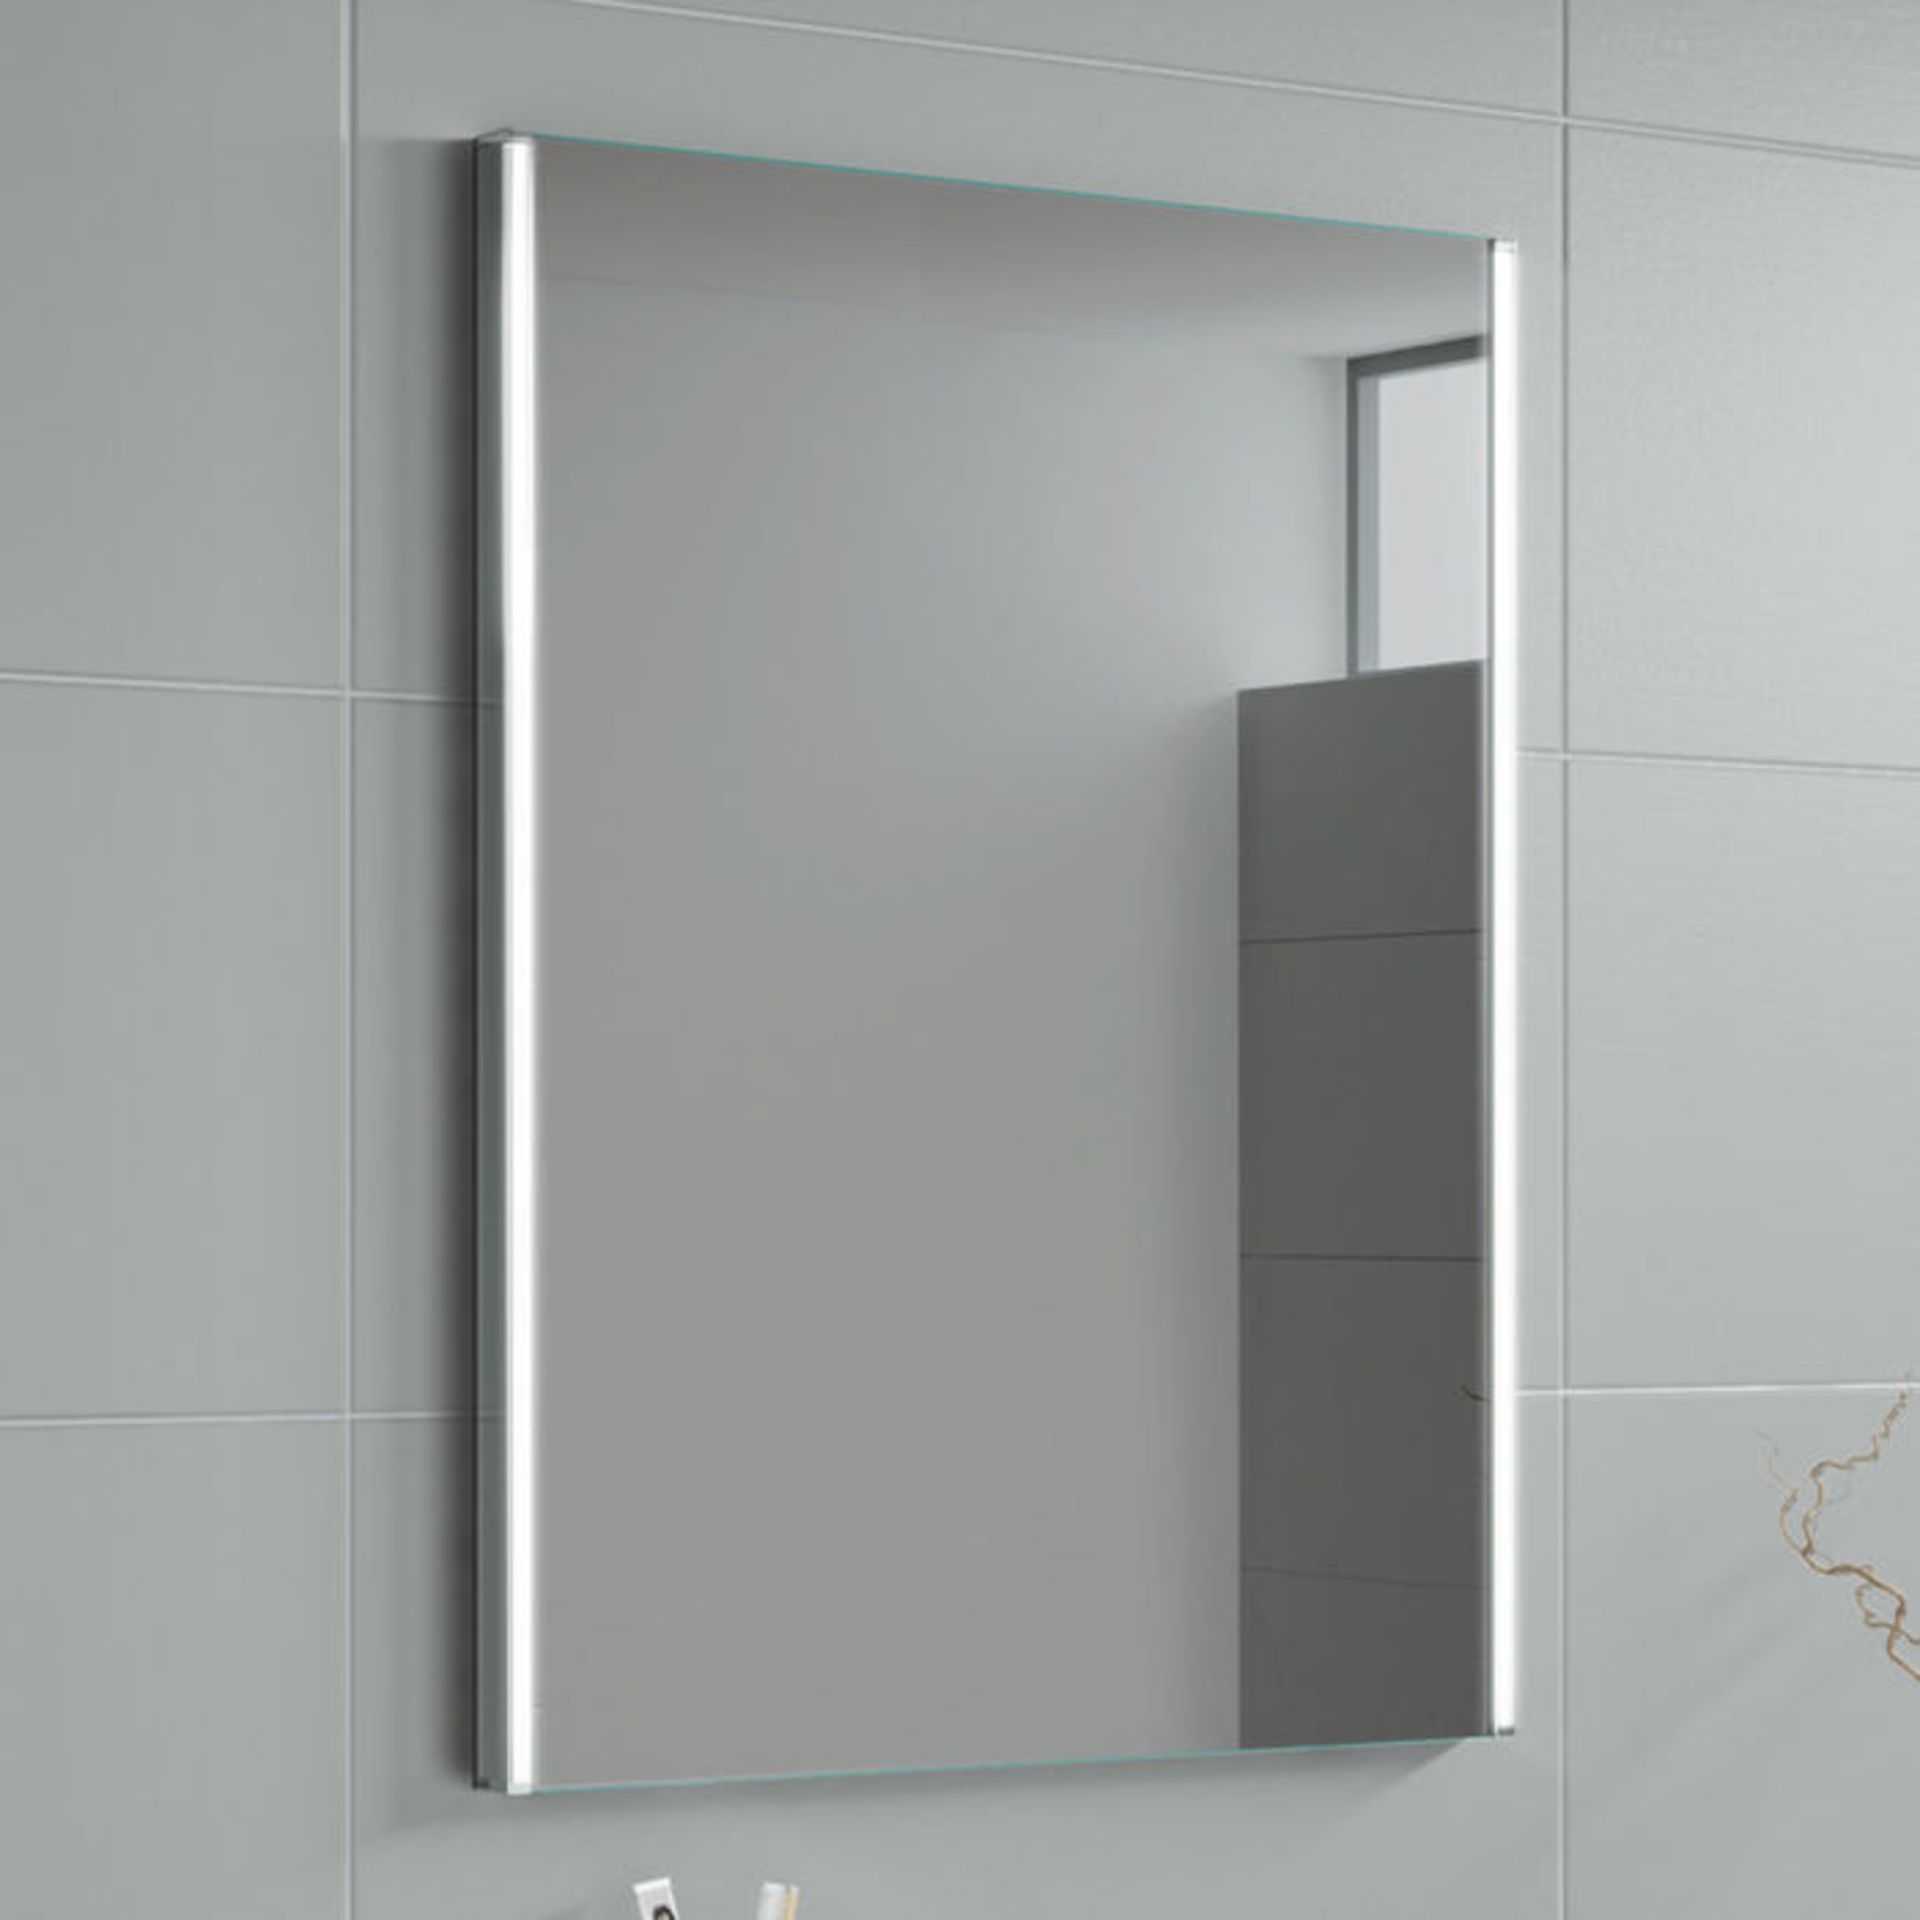 (HS121) 500x700mm Denver Illuminated LED Mirror - Battery Operated. Energy saving controlled On / - Image 3 of 3